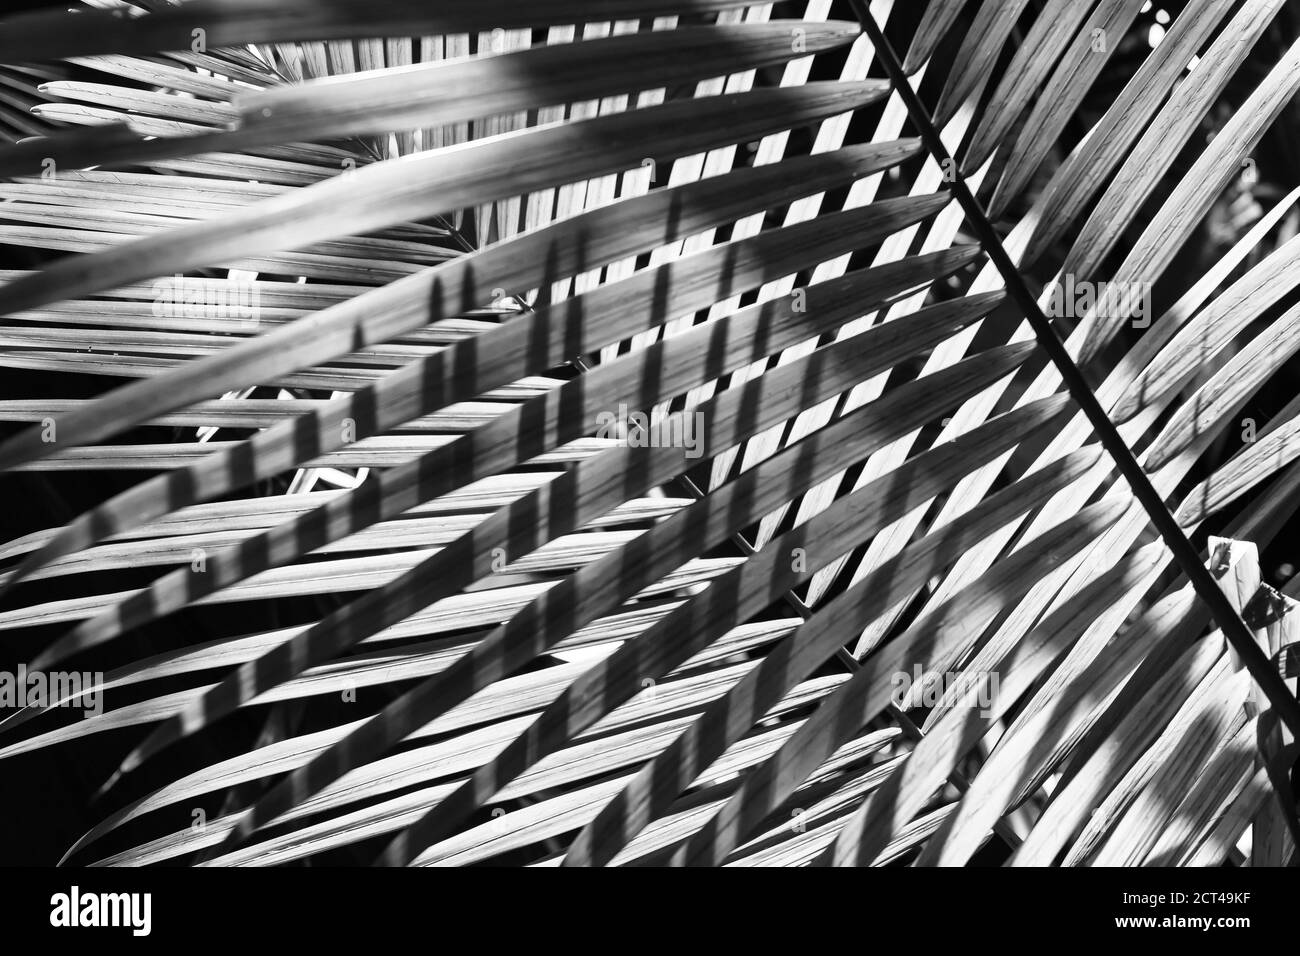 Black and white photo of a palm leaf that gets a striped pattern by the shadow of another palm leaf. Stock Photo